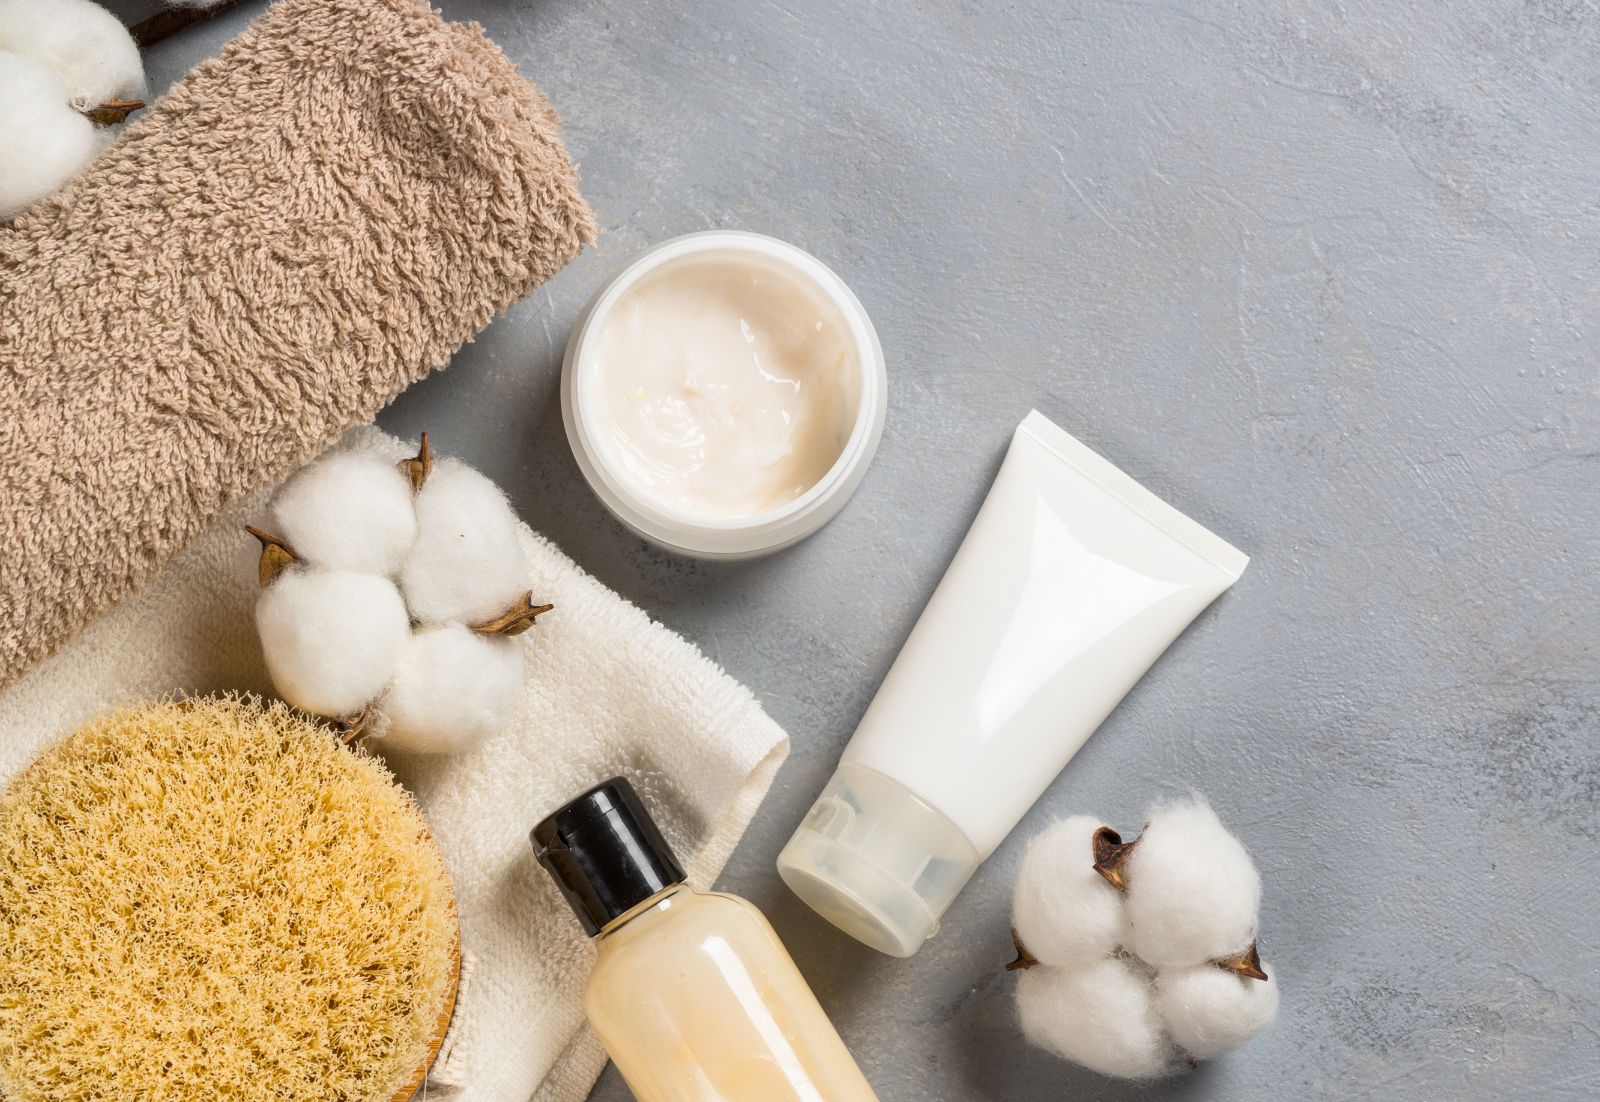 Haircare Products to Avoid: A List of Harmful Ingredients